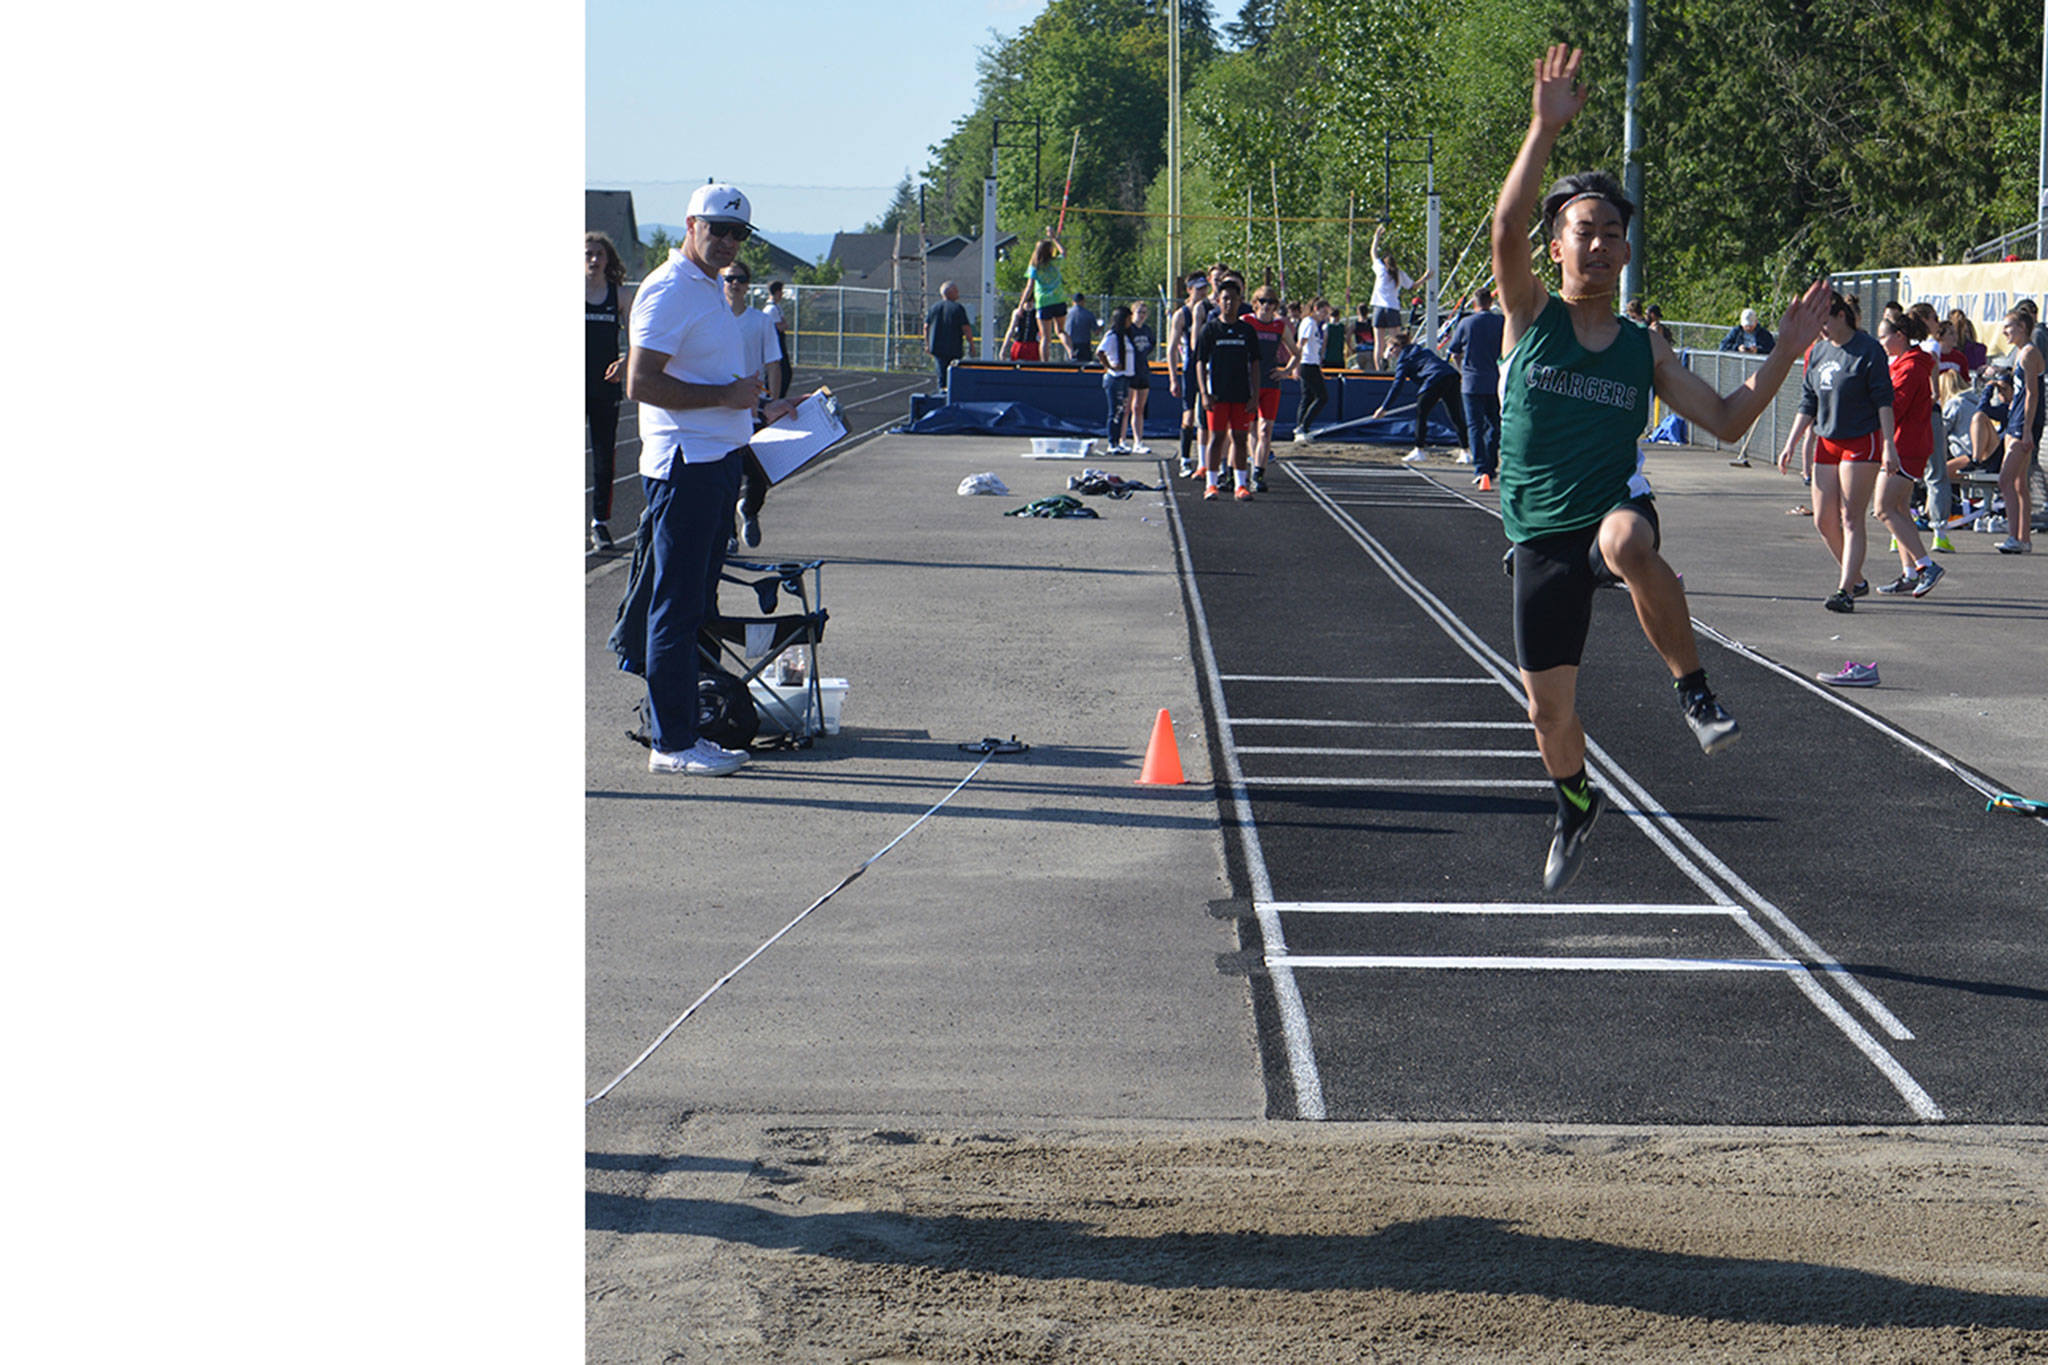 M-P speedster stands out at league track meet (slide show)